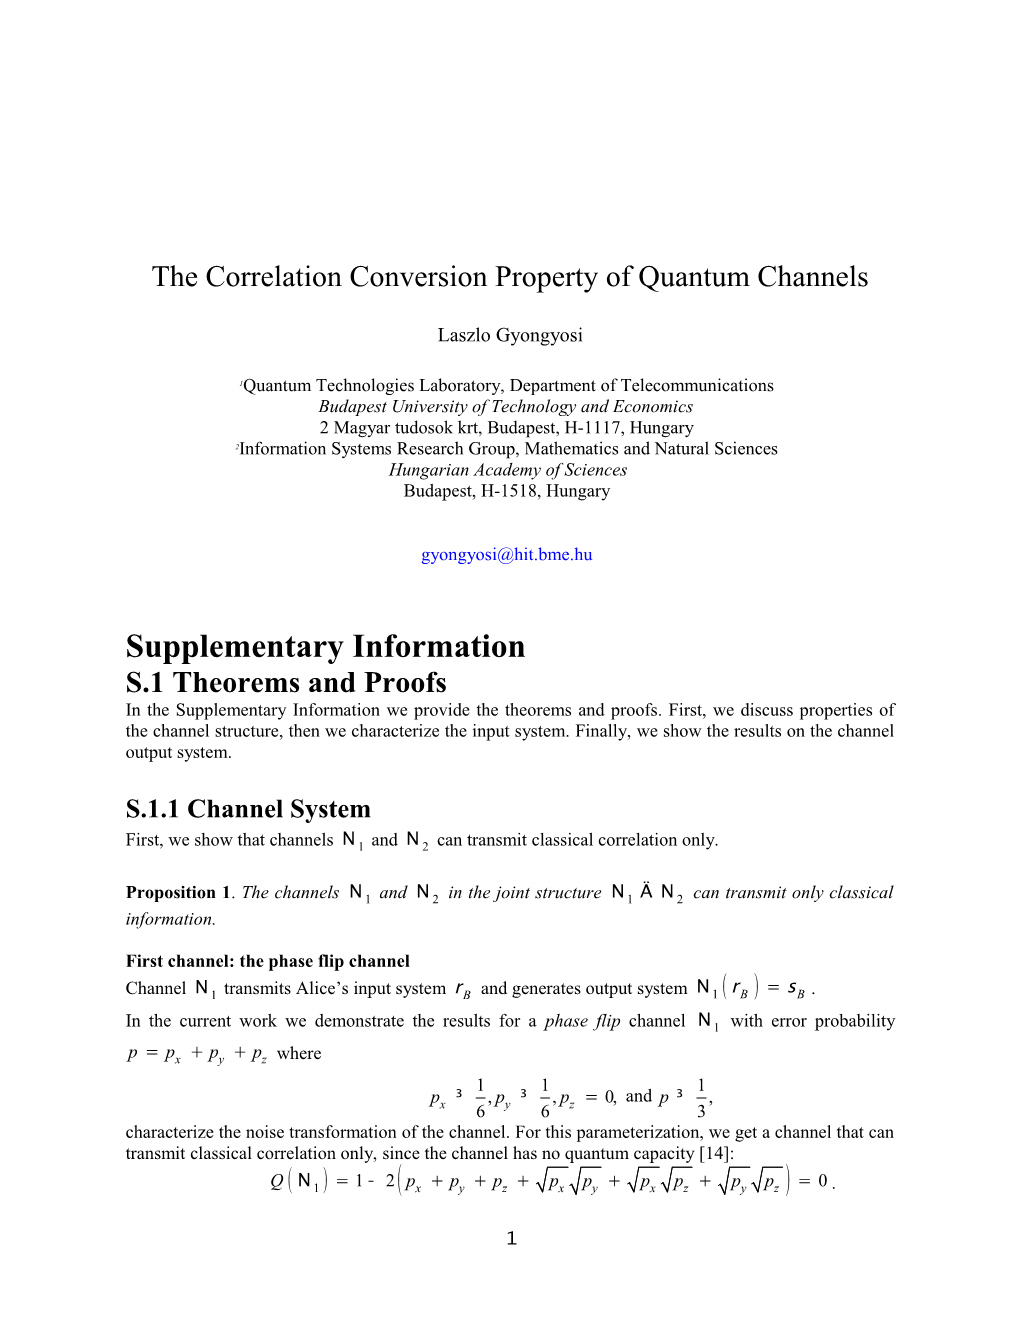 The Correlation Conversion Property of Quantum Channels